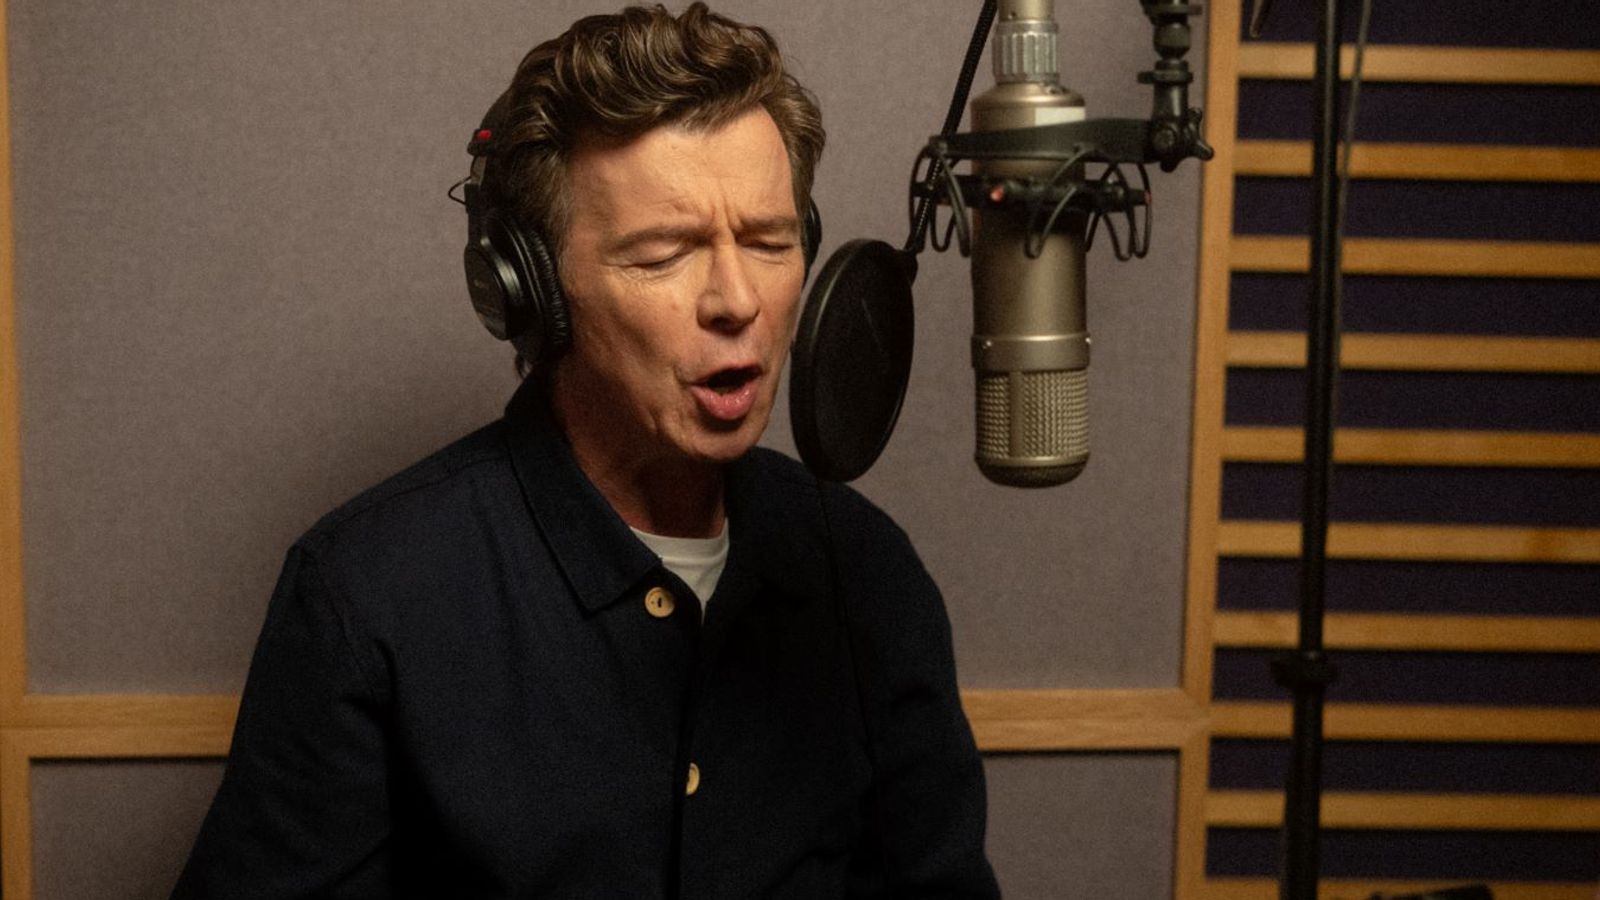 Rick Astley re-records iconic track with wrong lyrics for hearing awareness campaign